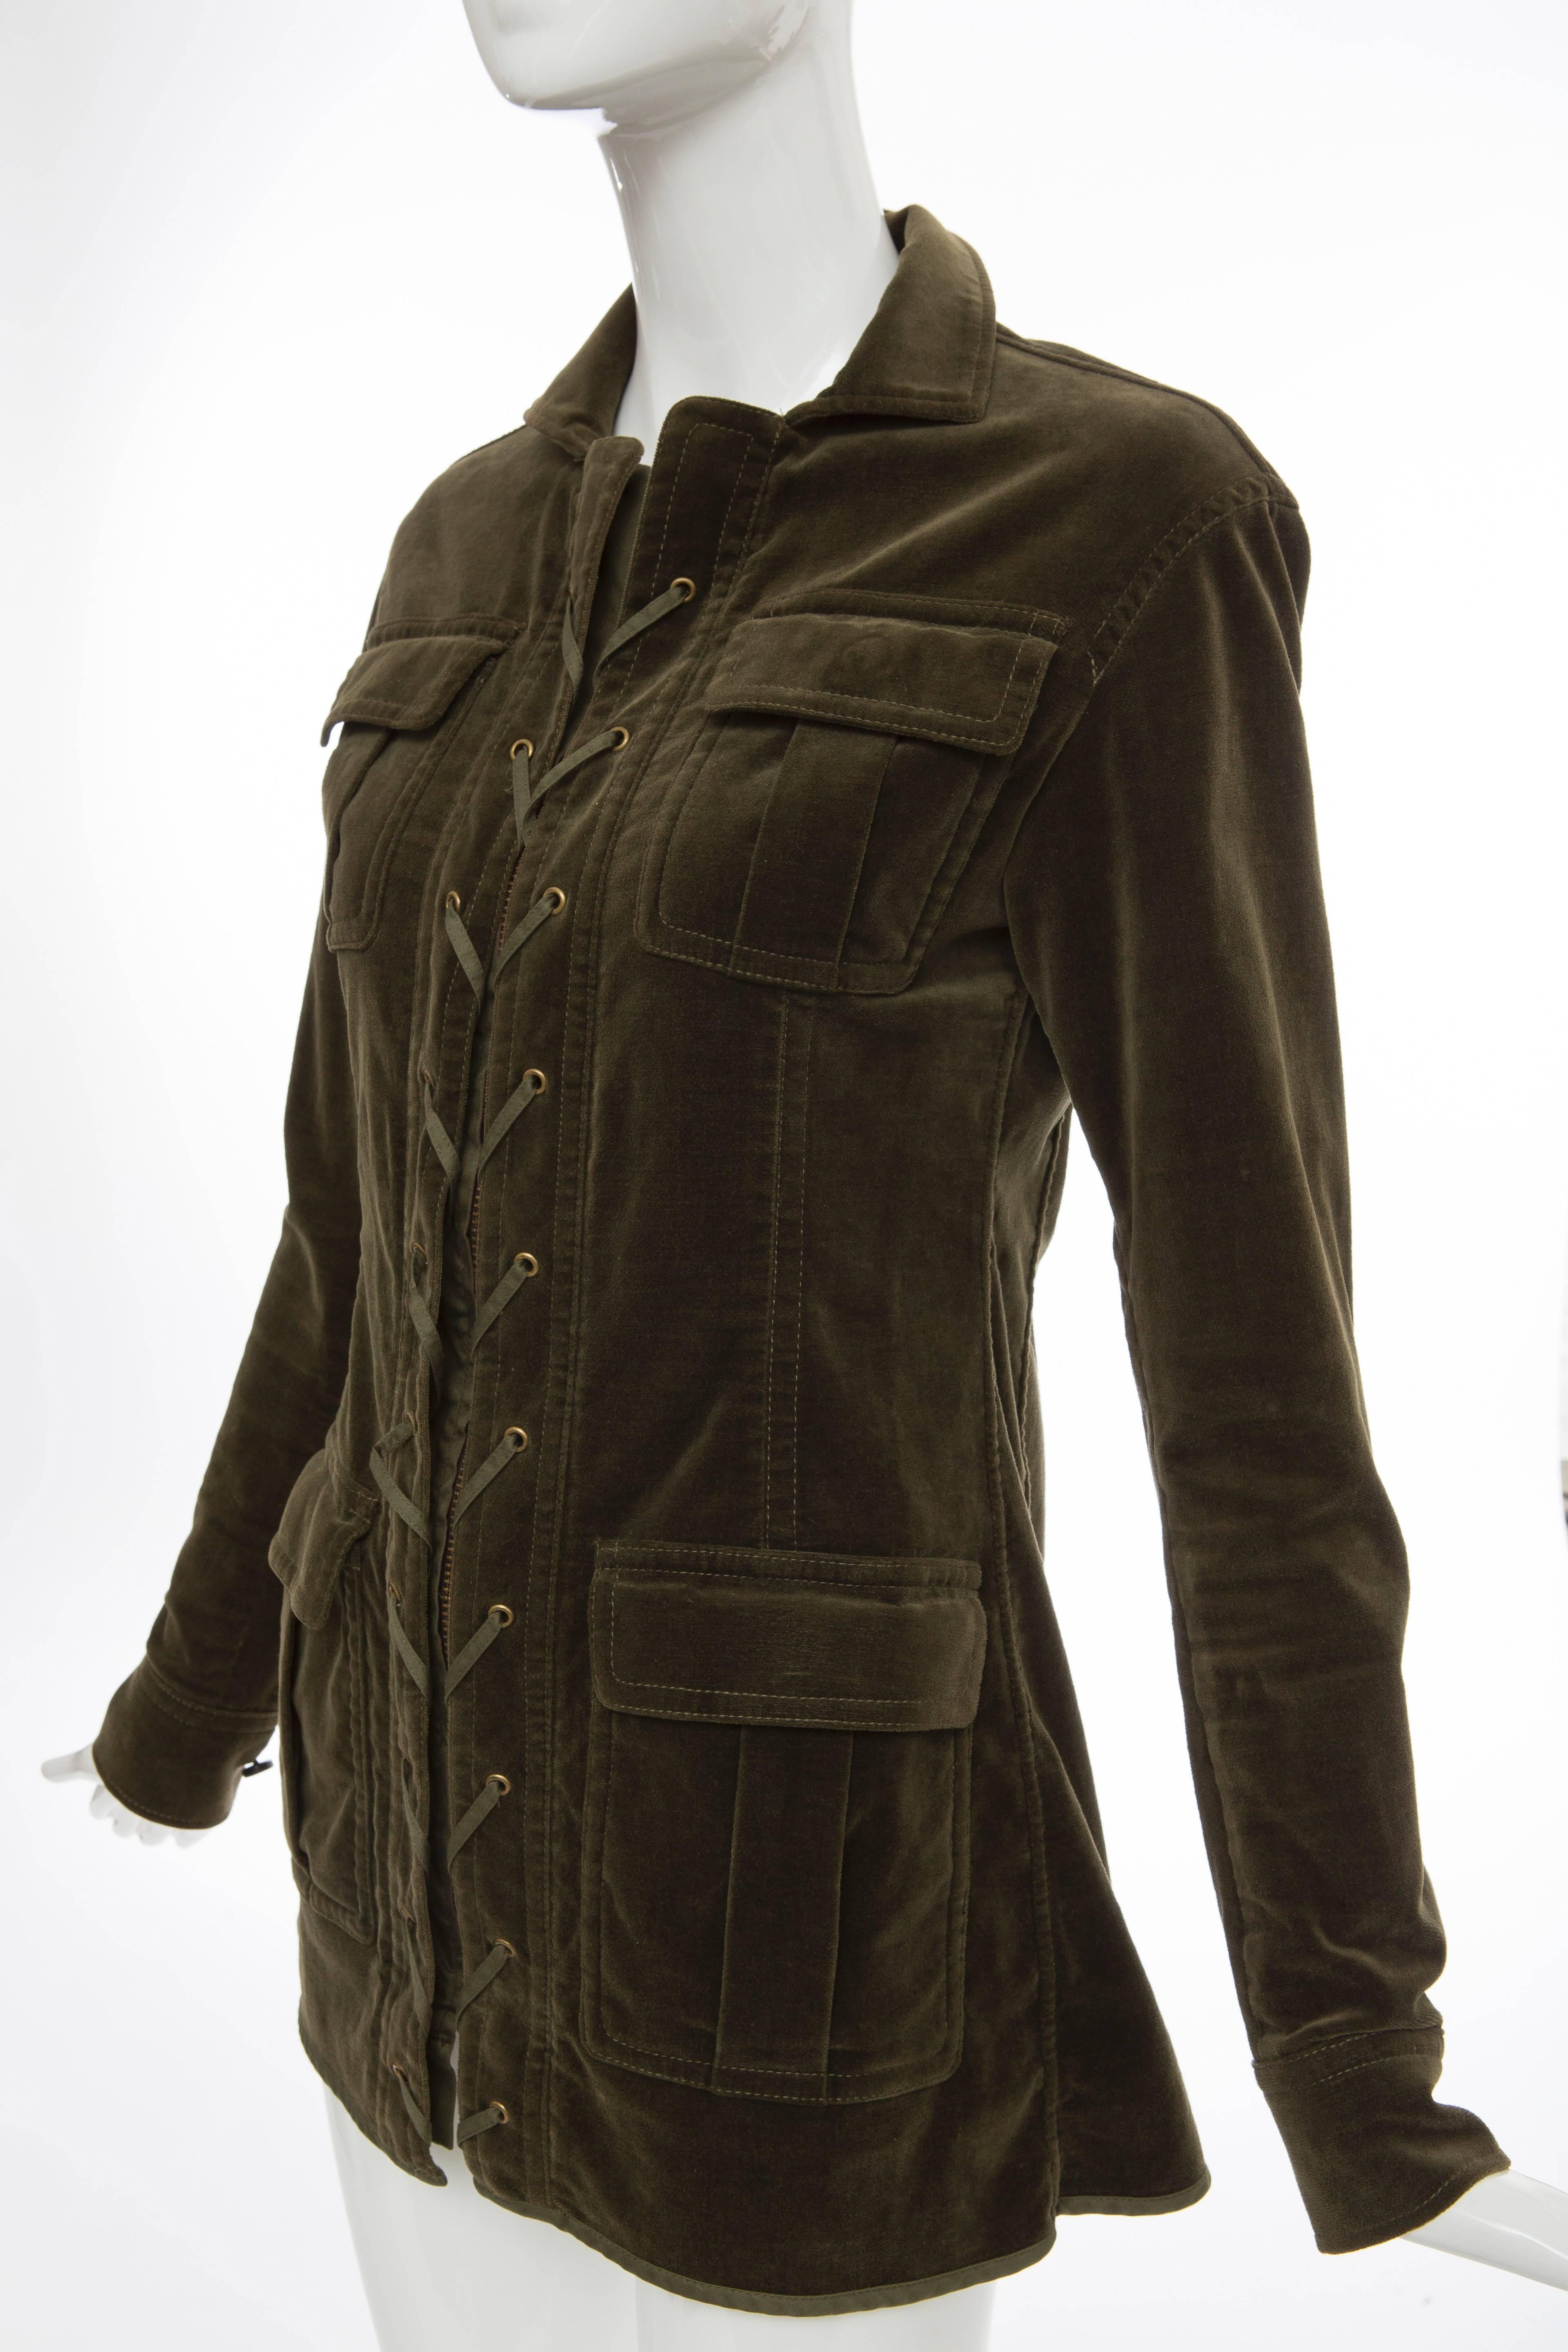 Tom Ford for Yves Saint Laurent, Autumn-Winter 2004, olive green velvet safari jacket with four patch pockets at front, lace up detailing at placket and concealed zip closure at front.

FR. 34
US. 2

Bust 33”, Waist 33”, Shoulder 16”, Length